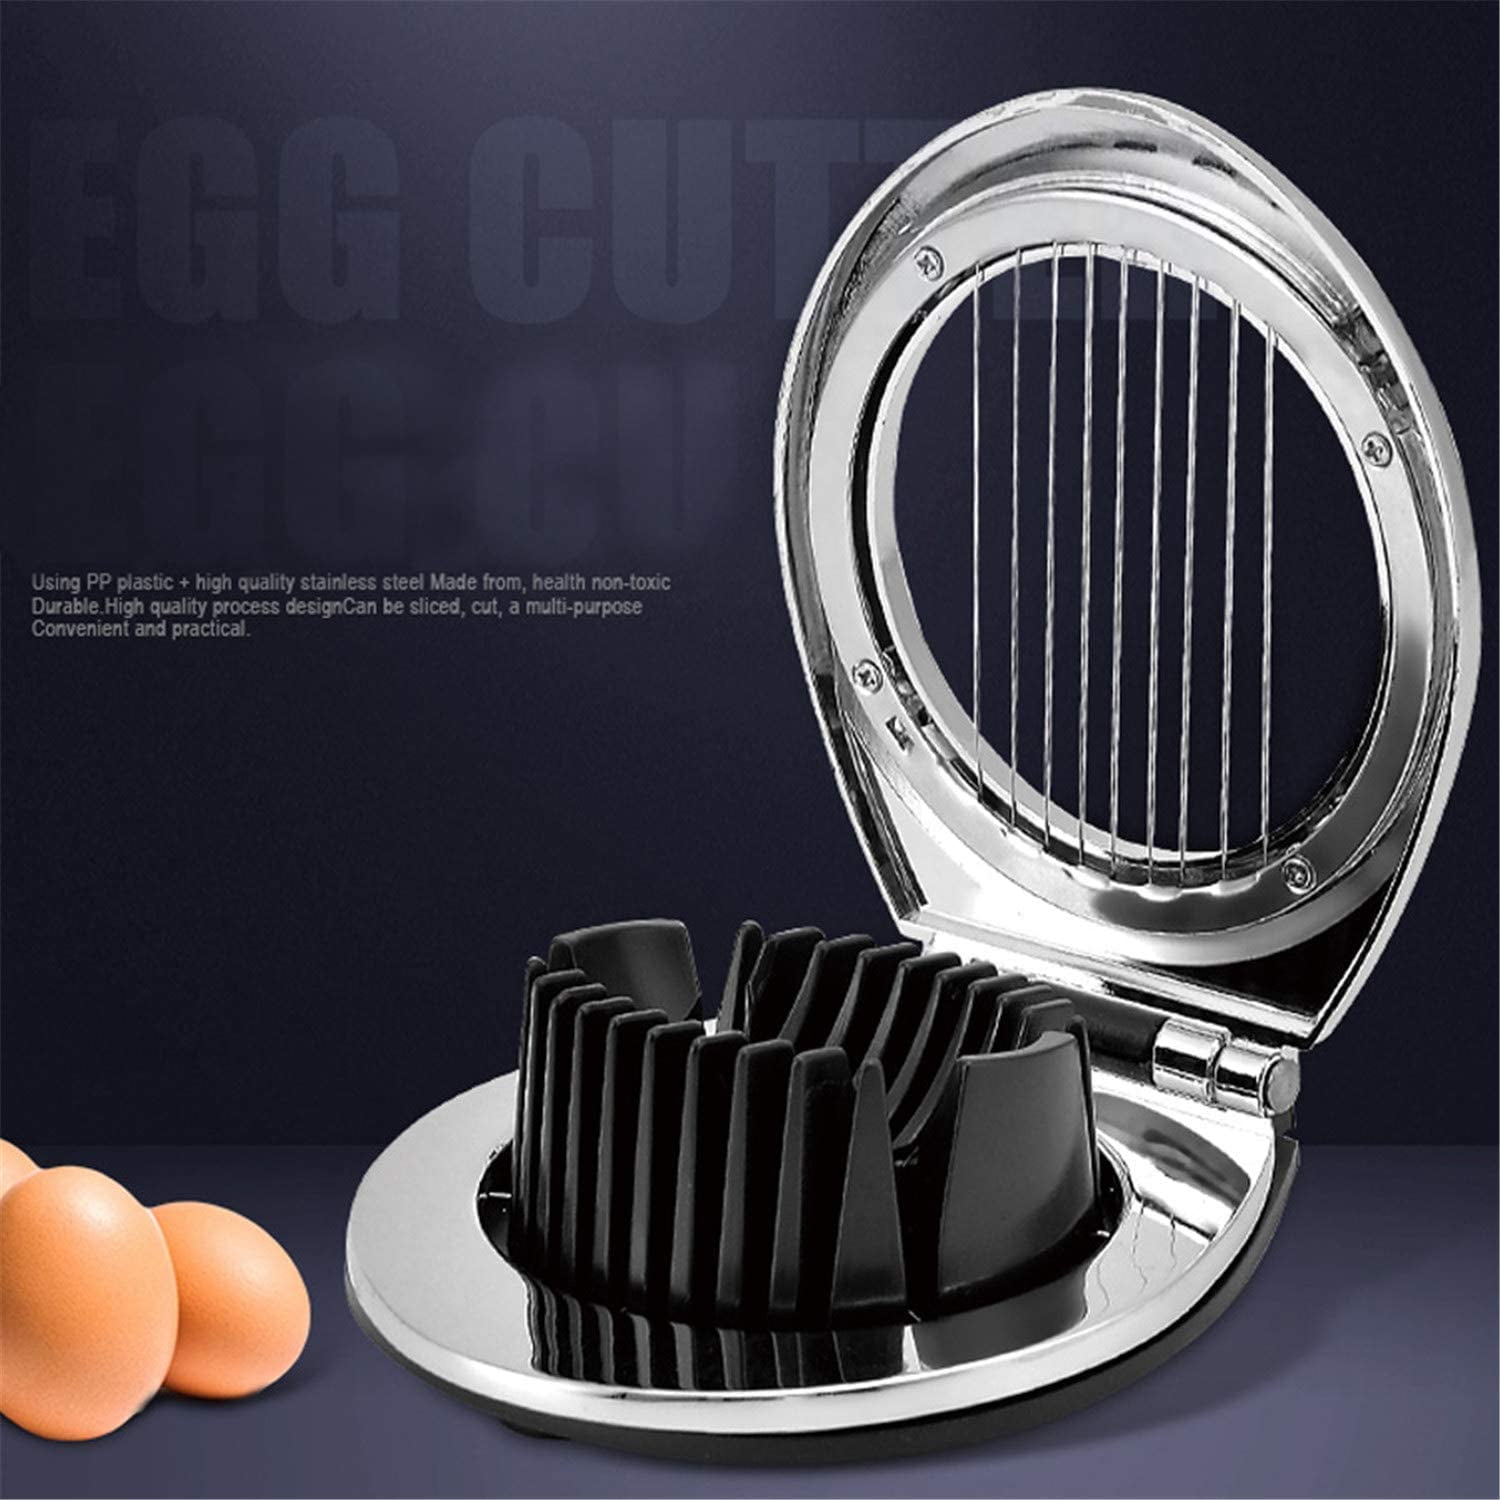 Egg Wave-Cut, Lace Egg Cutter, Fancy Egg Cutter,Slicing Gadgets Kitchen Accessories,Material Safety and Easy to clean(2Pcs/Set)